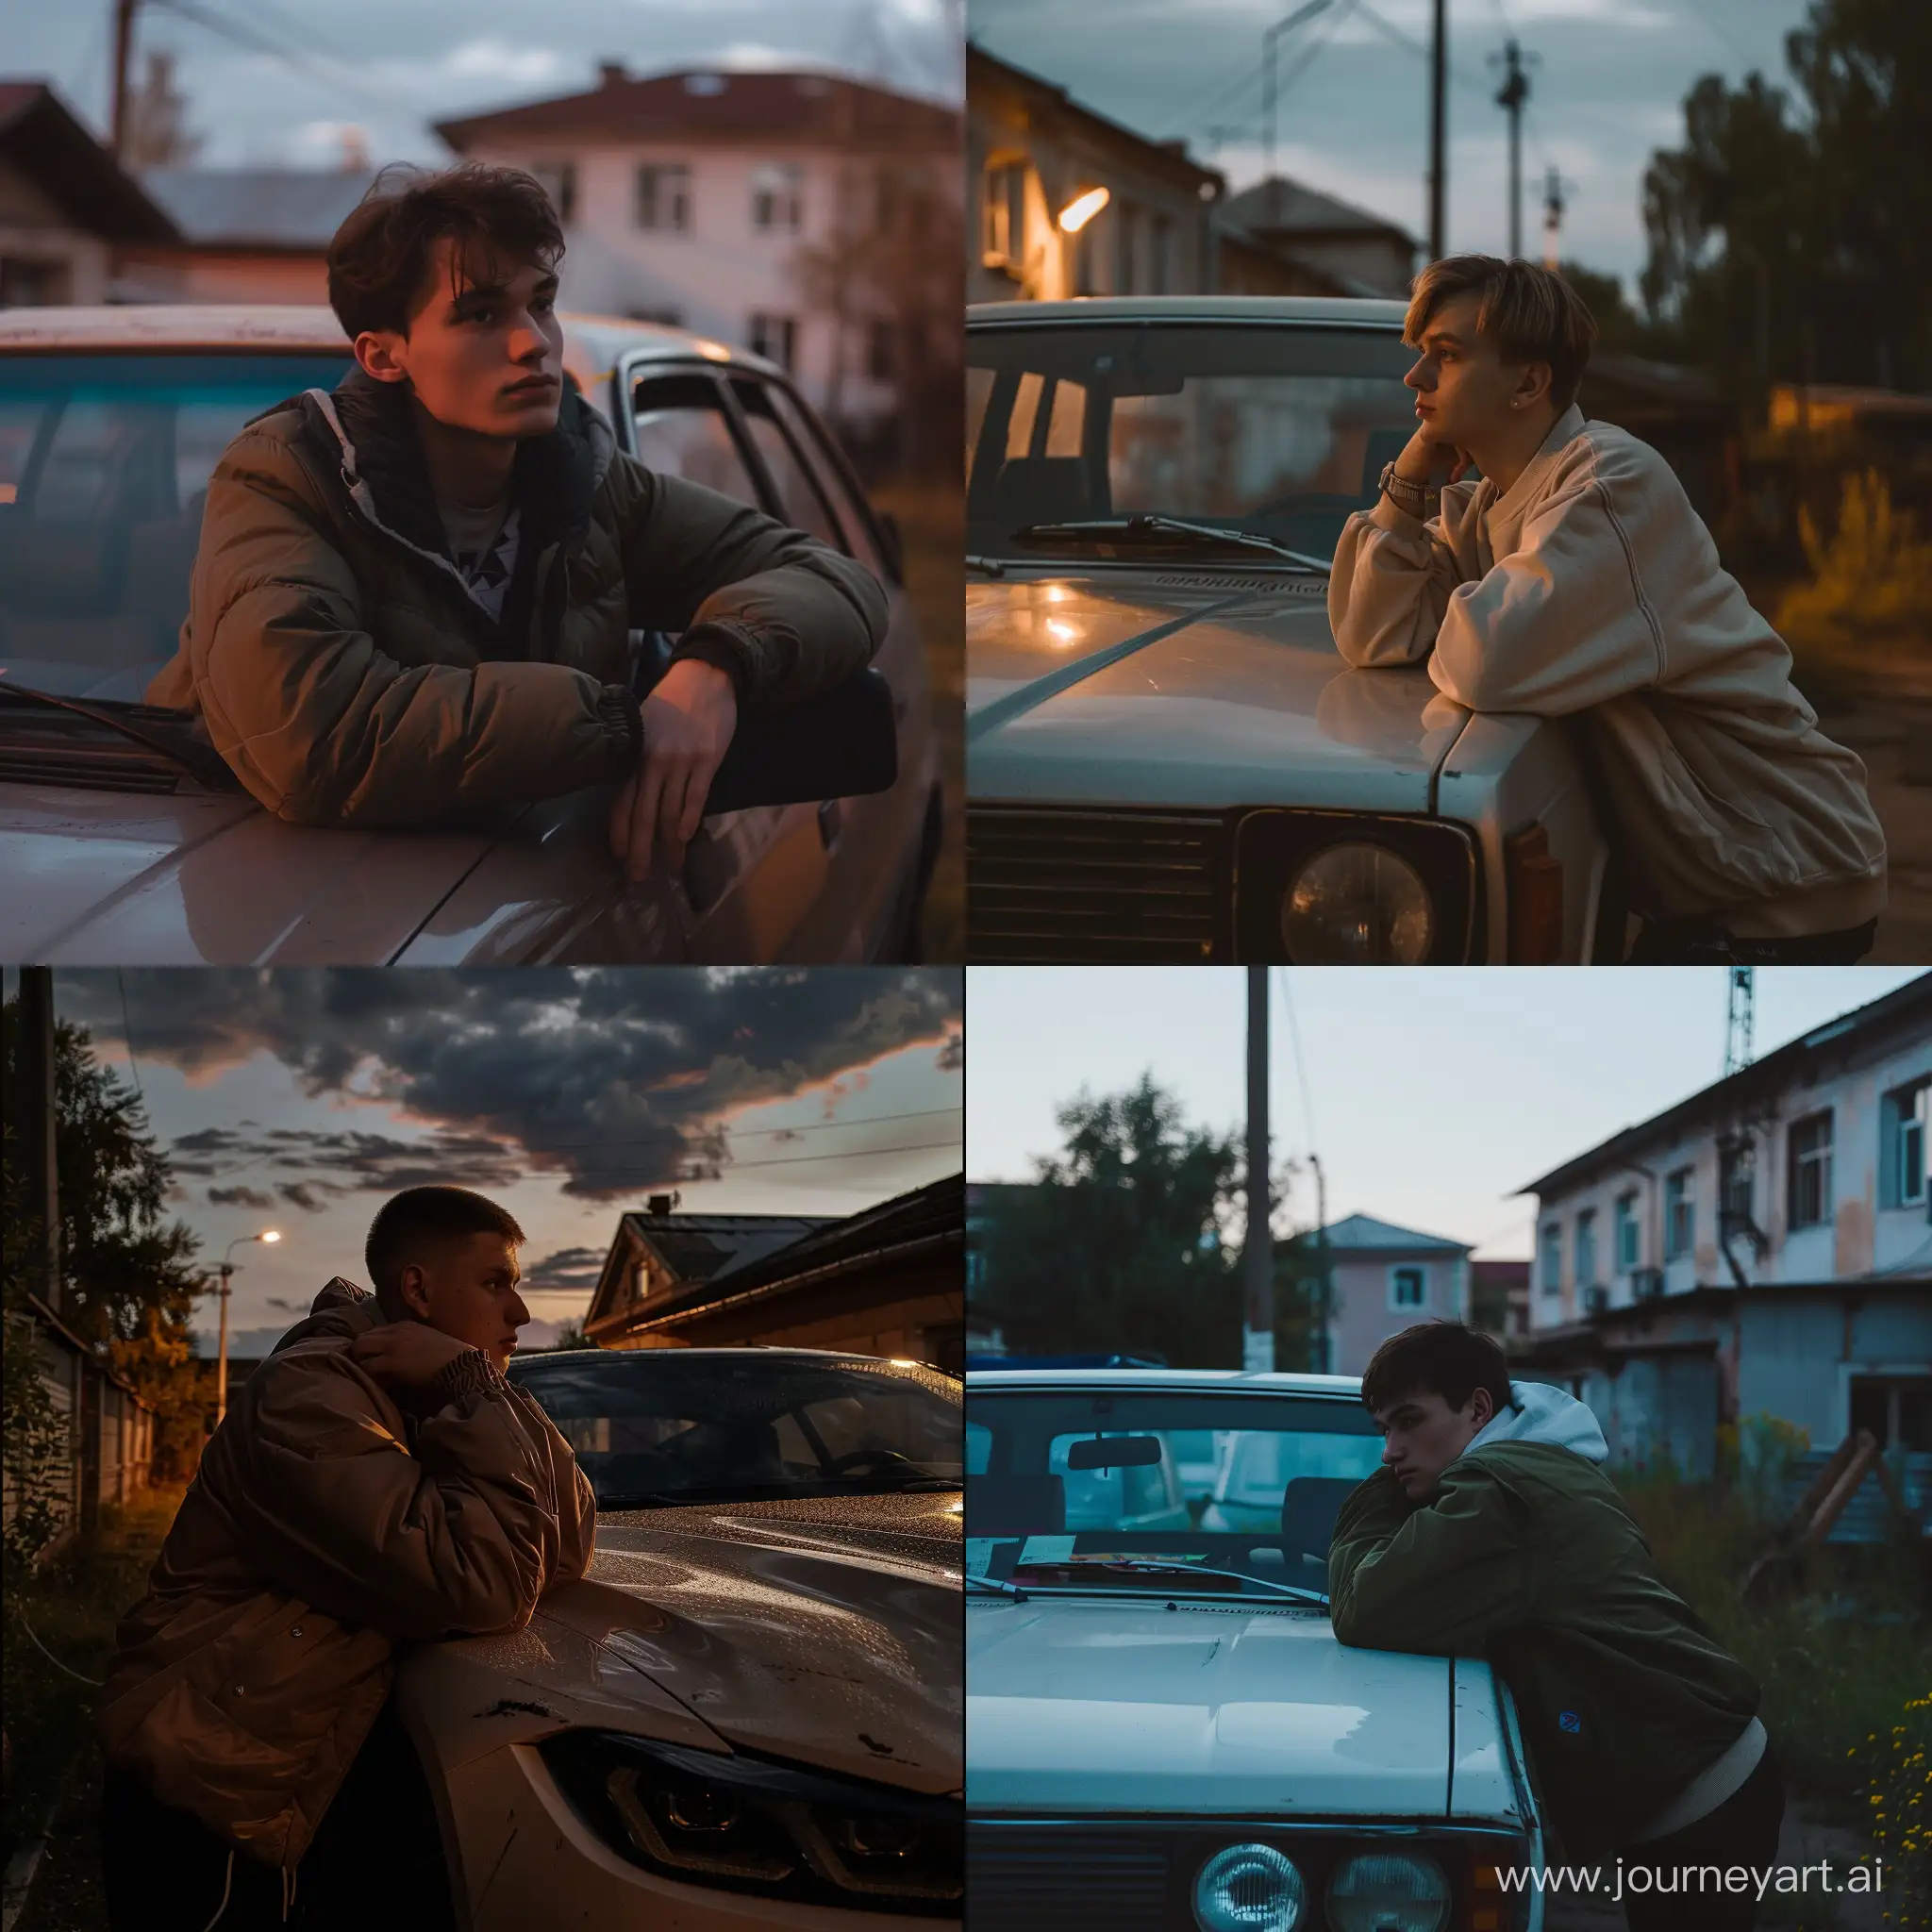 photo on the phone of average quality, a guy 19-22 years old leaning on the car and looking away in the evening, Slavic appearance. The car is parked in a yard in Russia